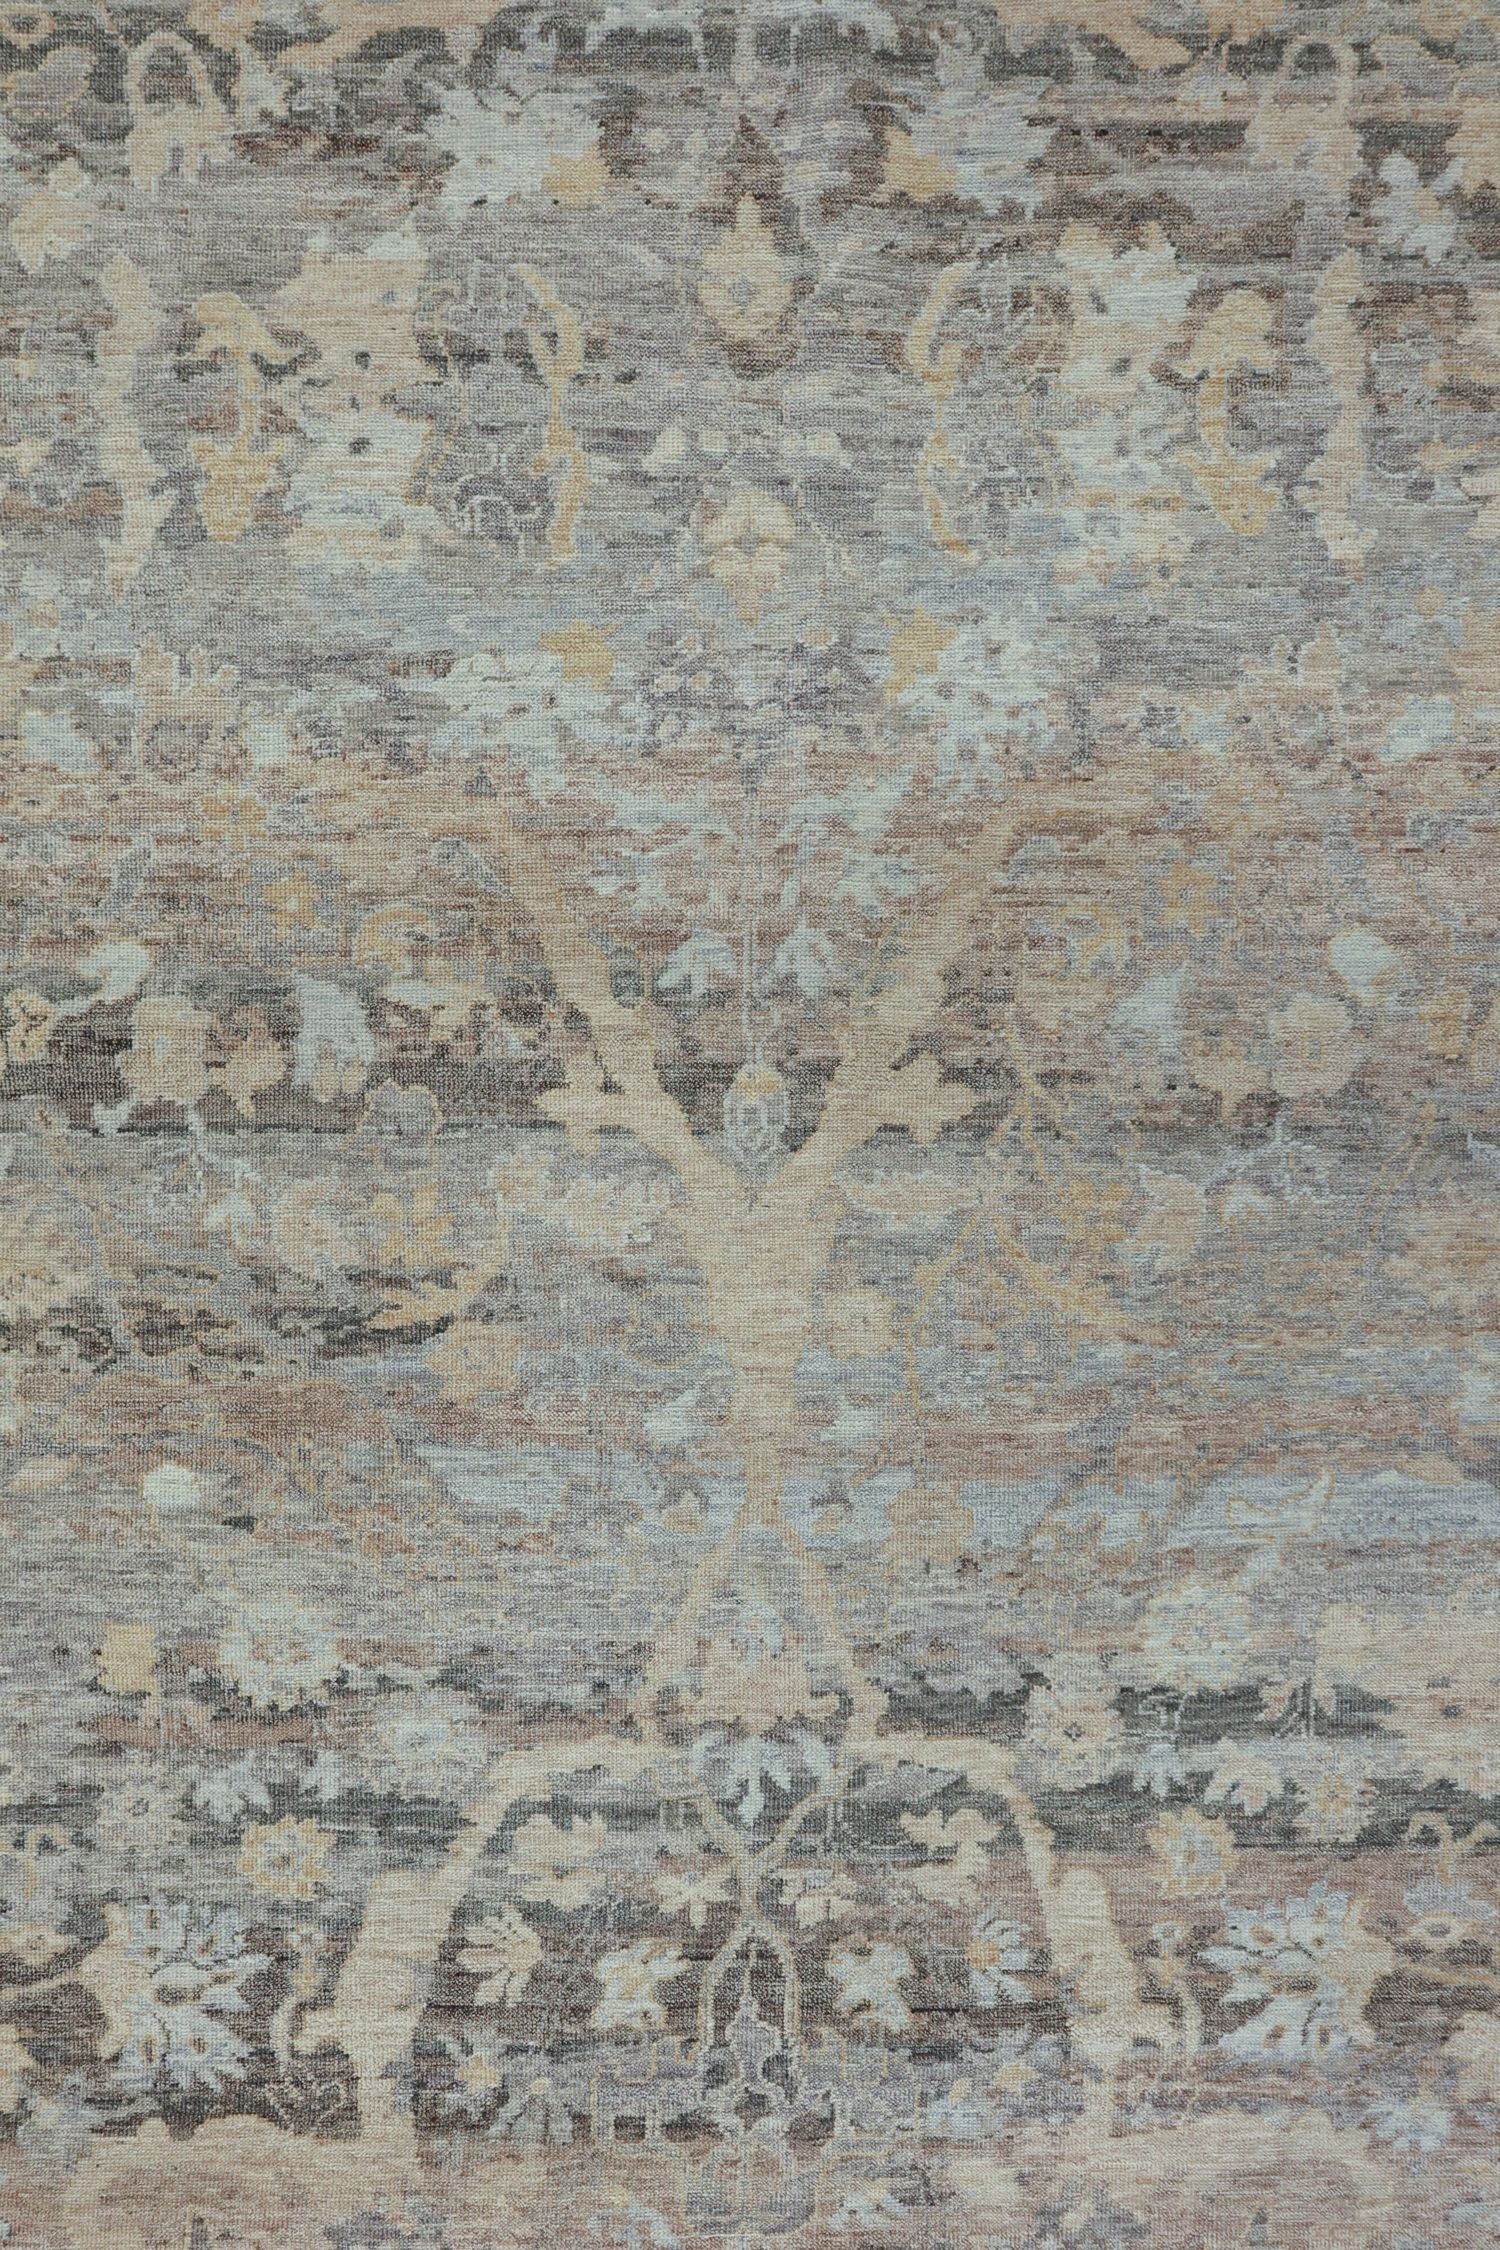 Sultanabad Handwoven Transitional Rug, J72000